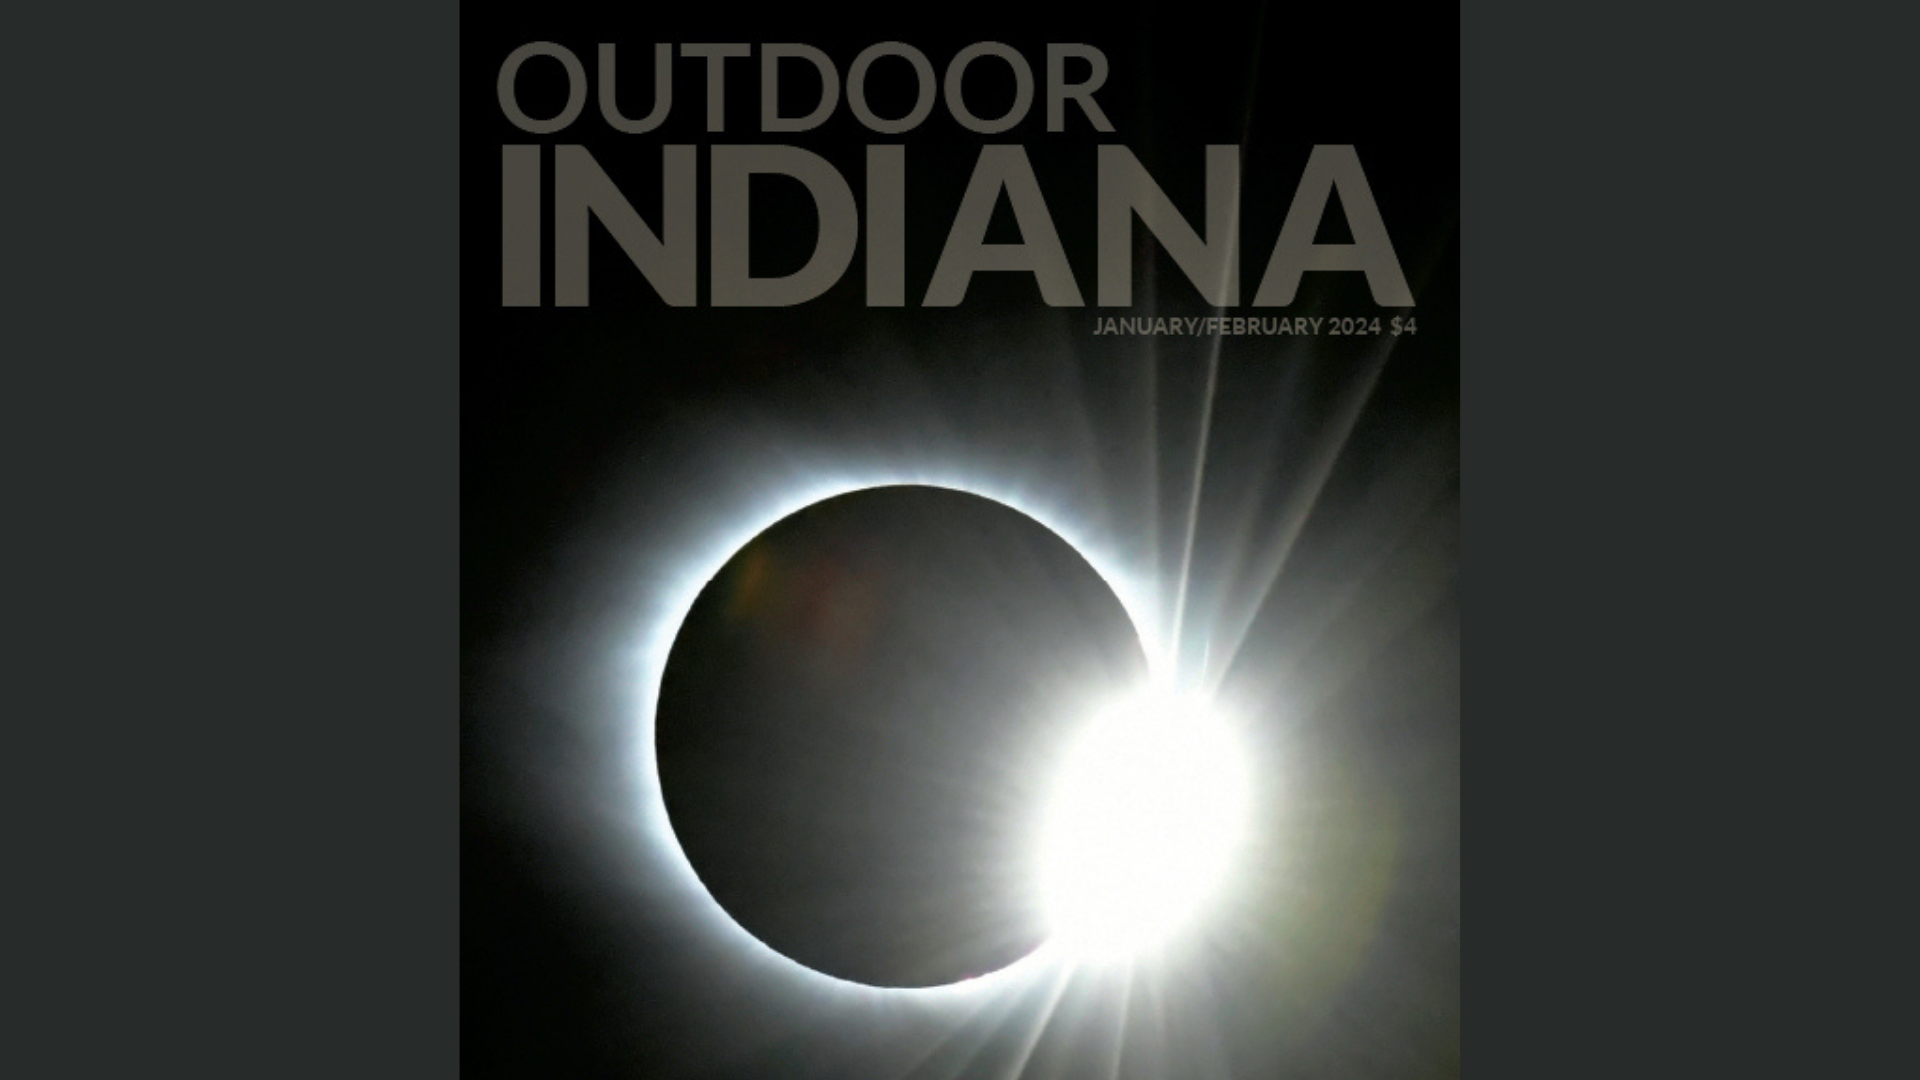 The Newest Issue of Indiana DNR's Magazine "Outdoor Indiana" Features